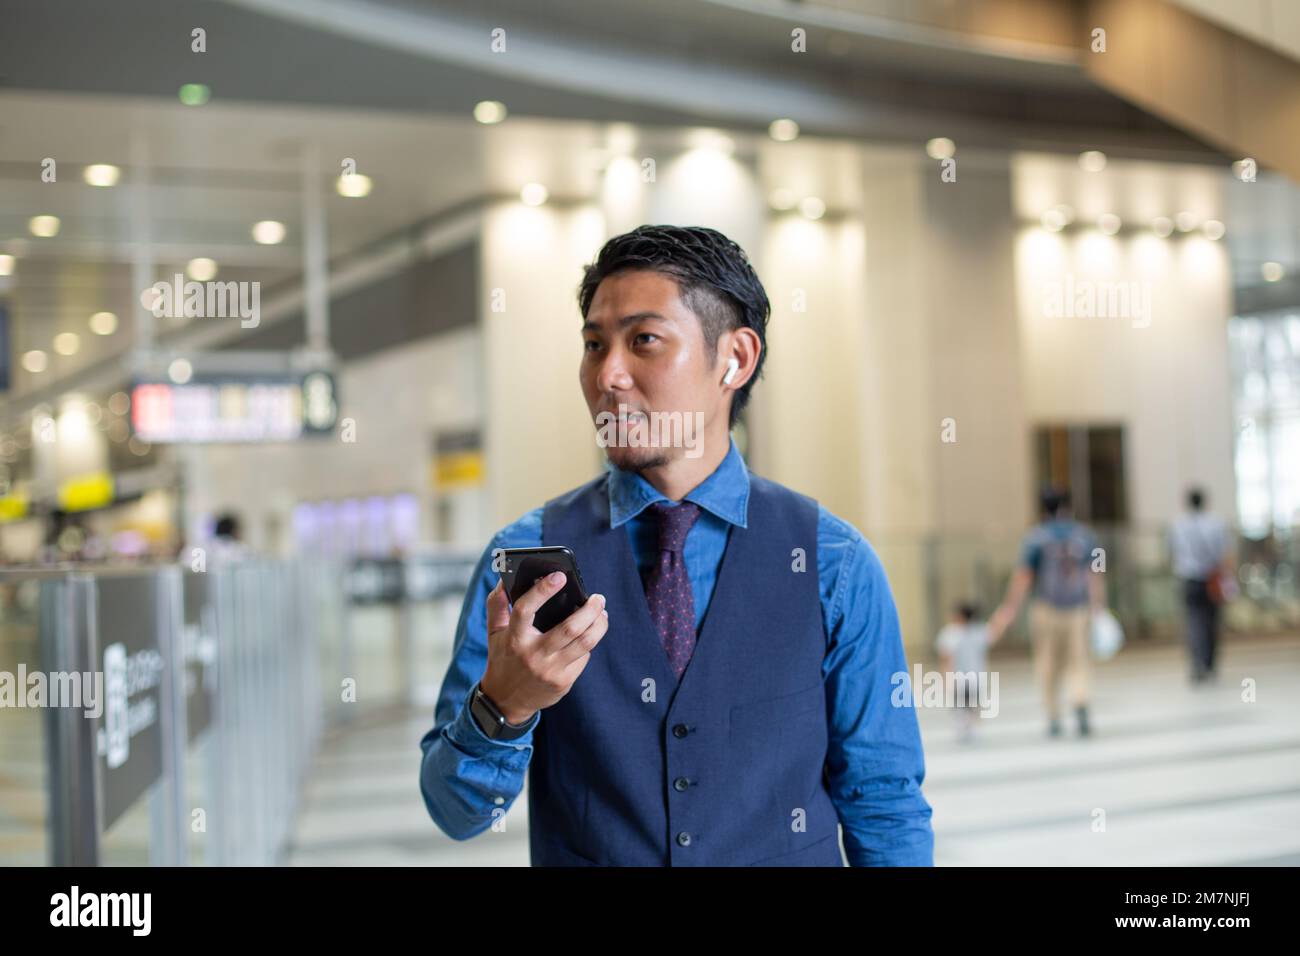 A young businessman in the city, on the move, at a transport hub, holding his phone and looking around. Stock Photo